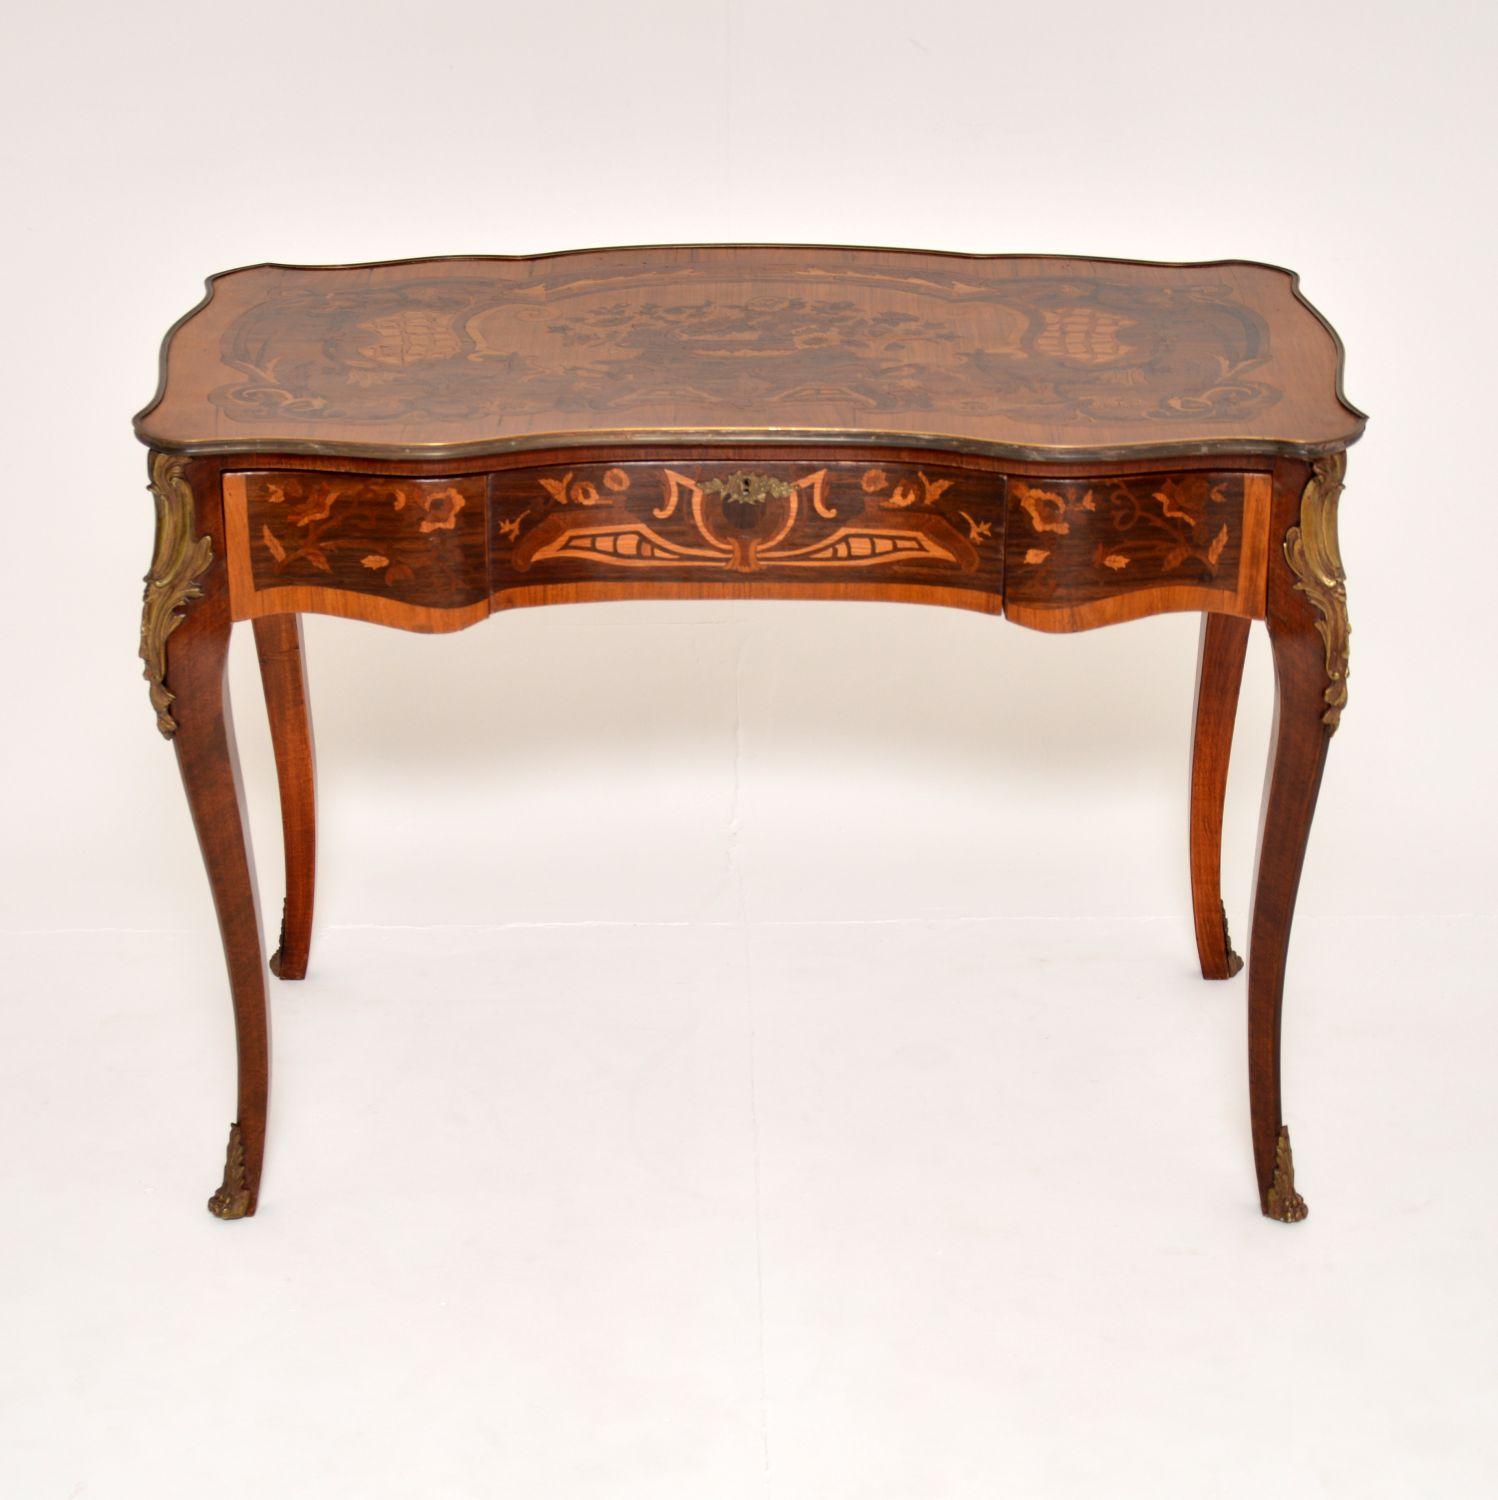 A stunning antique French Louis XV style bureau plat desk, which I would date from around the 1930’s period.
It is of superb quality and is beautifully inlaid with stunning marquetry of various woods. This has an inverted breakfront design with